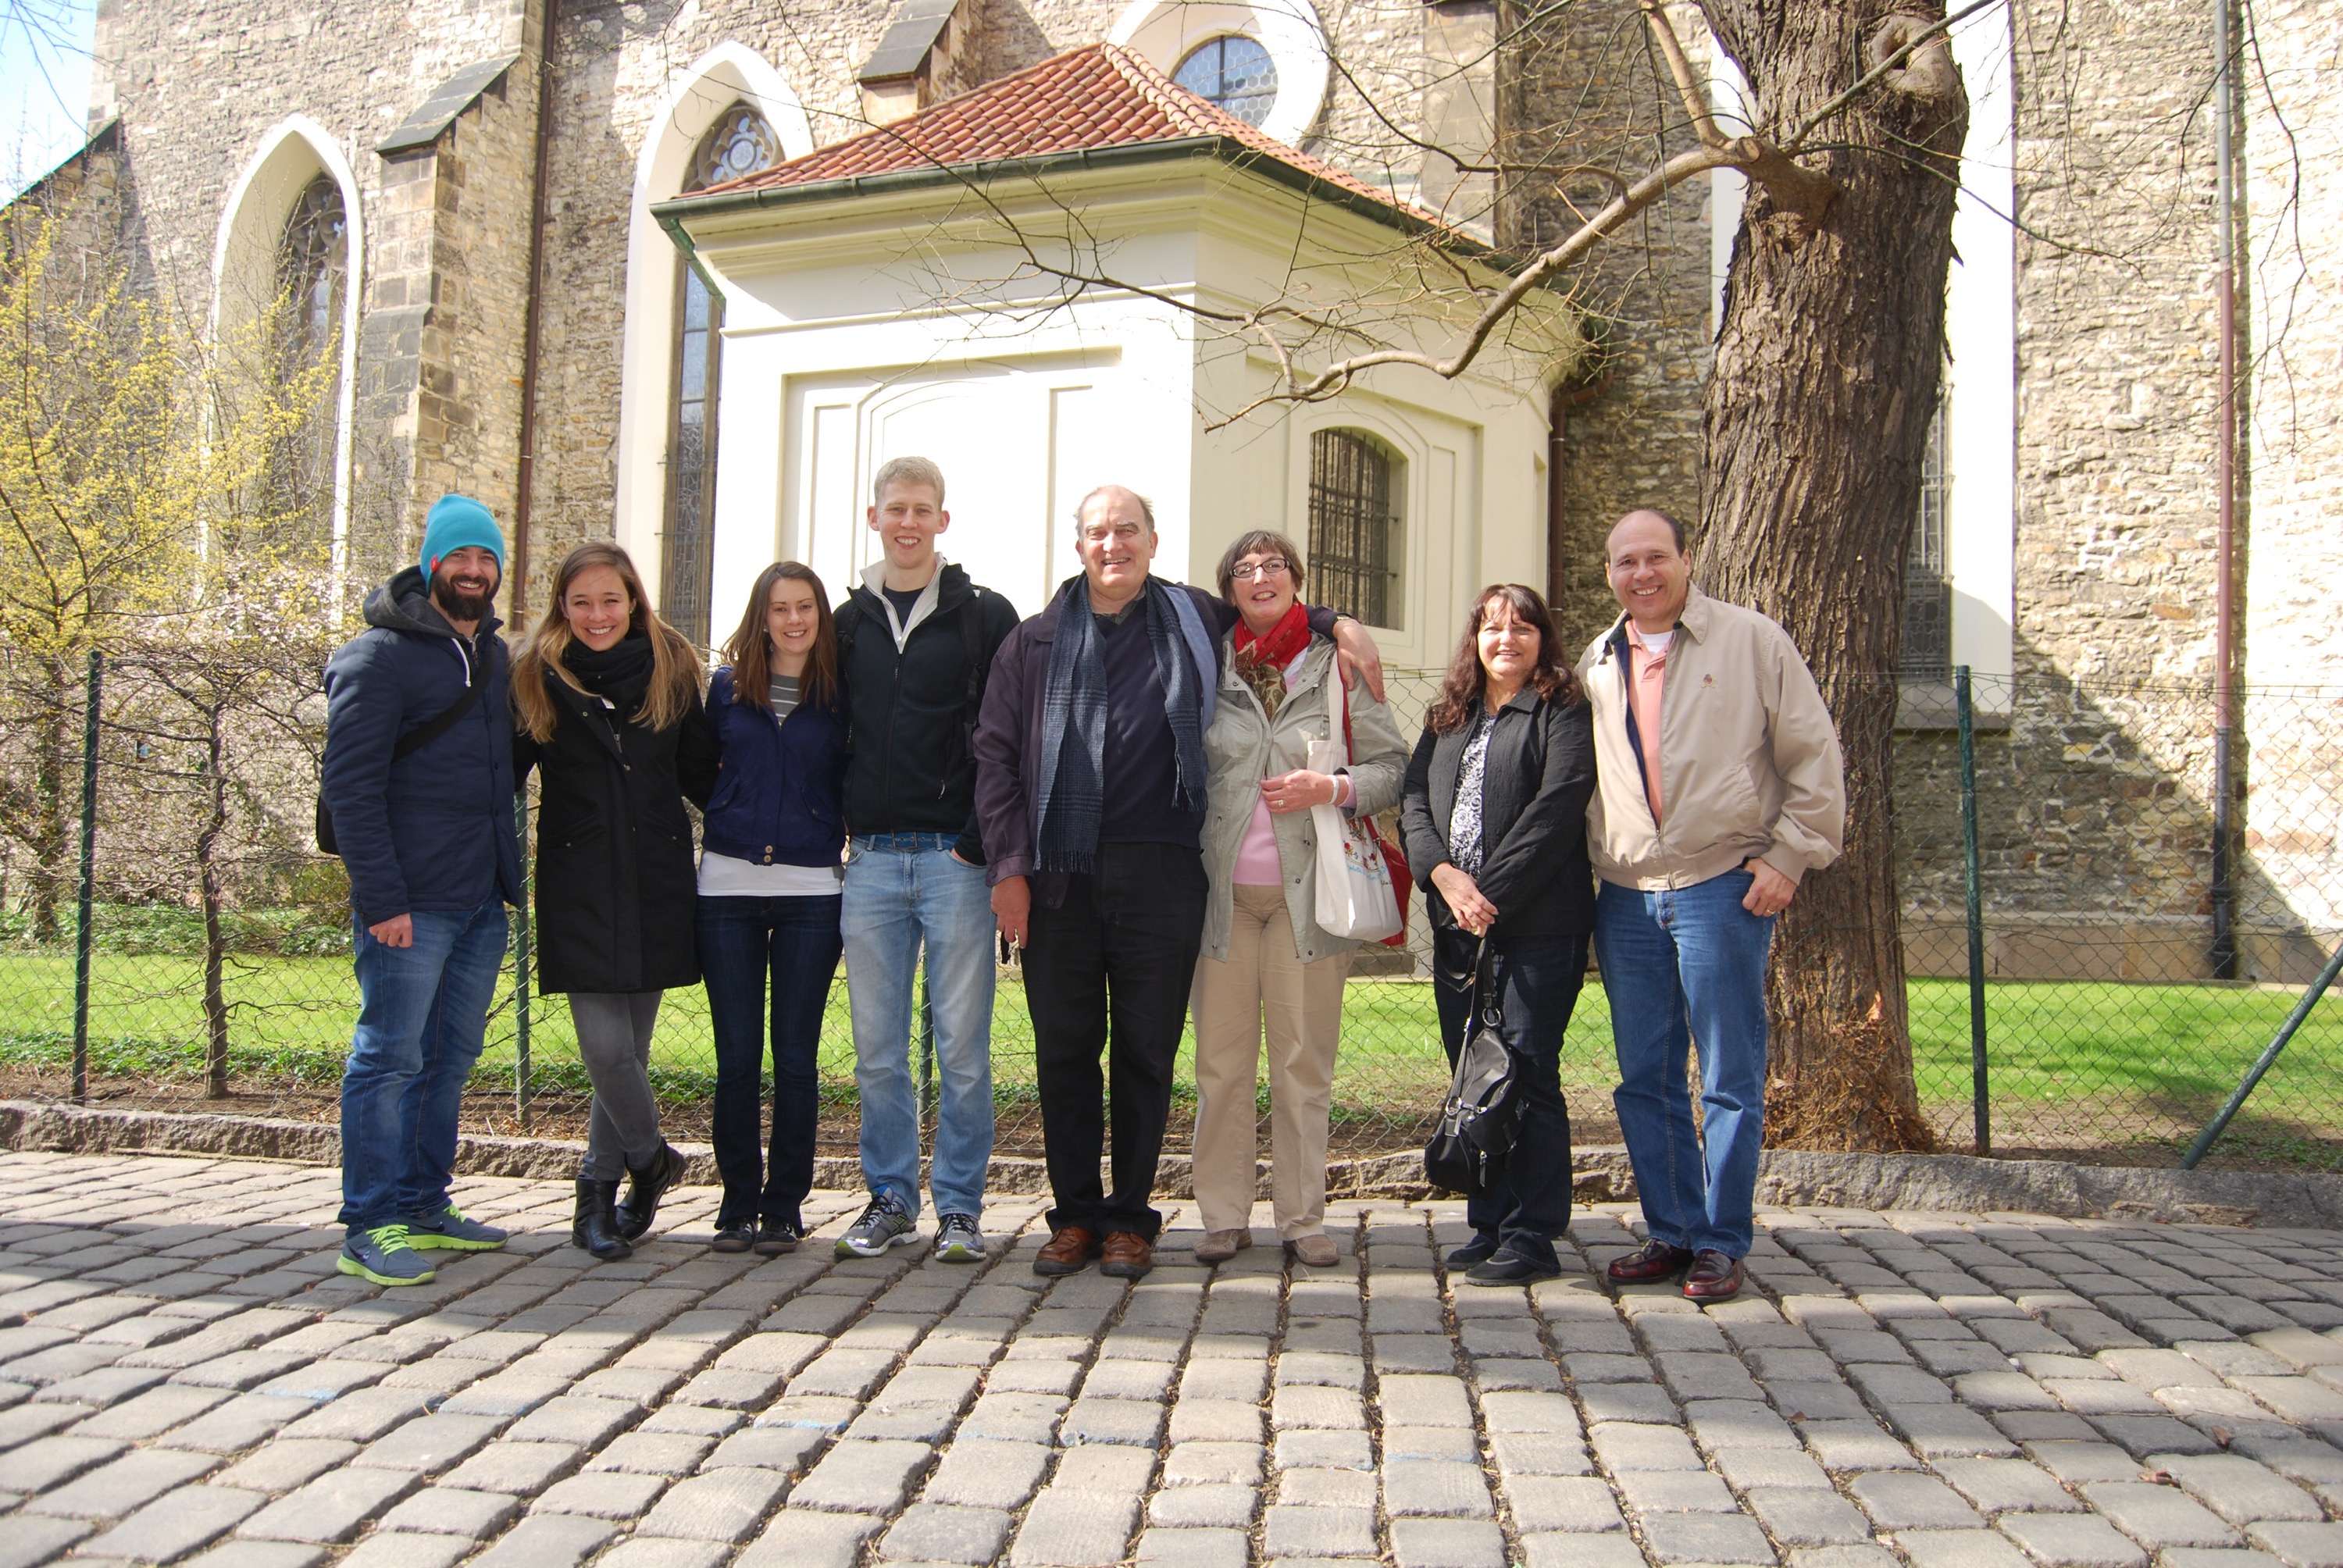 Our merry band of foodies on our Eating Prague Tour